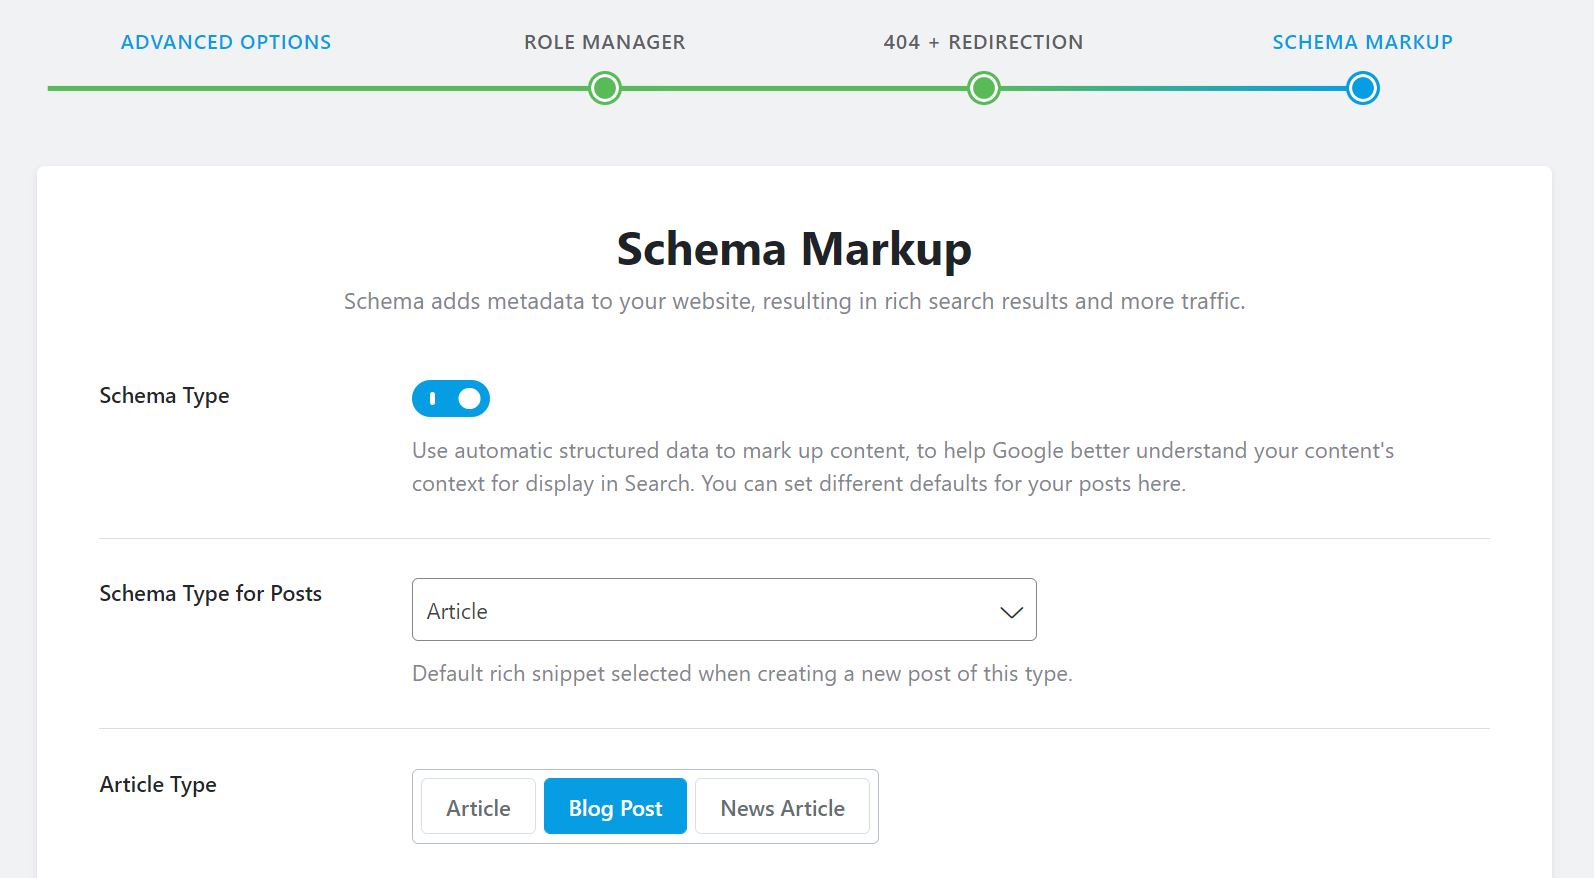 Learn About Job Posting Schema Markup